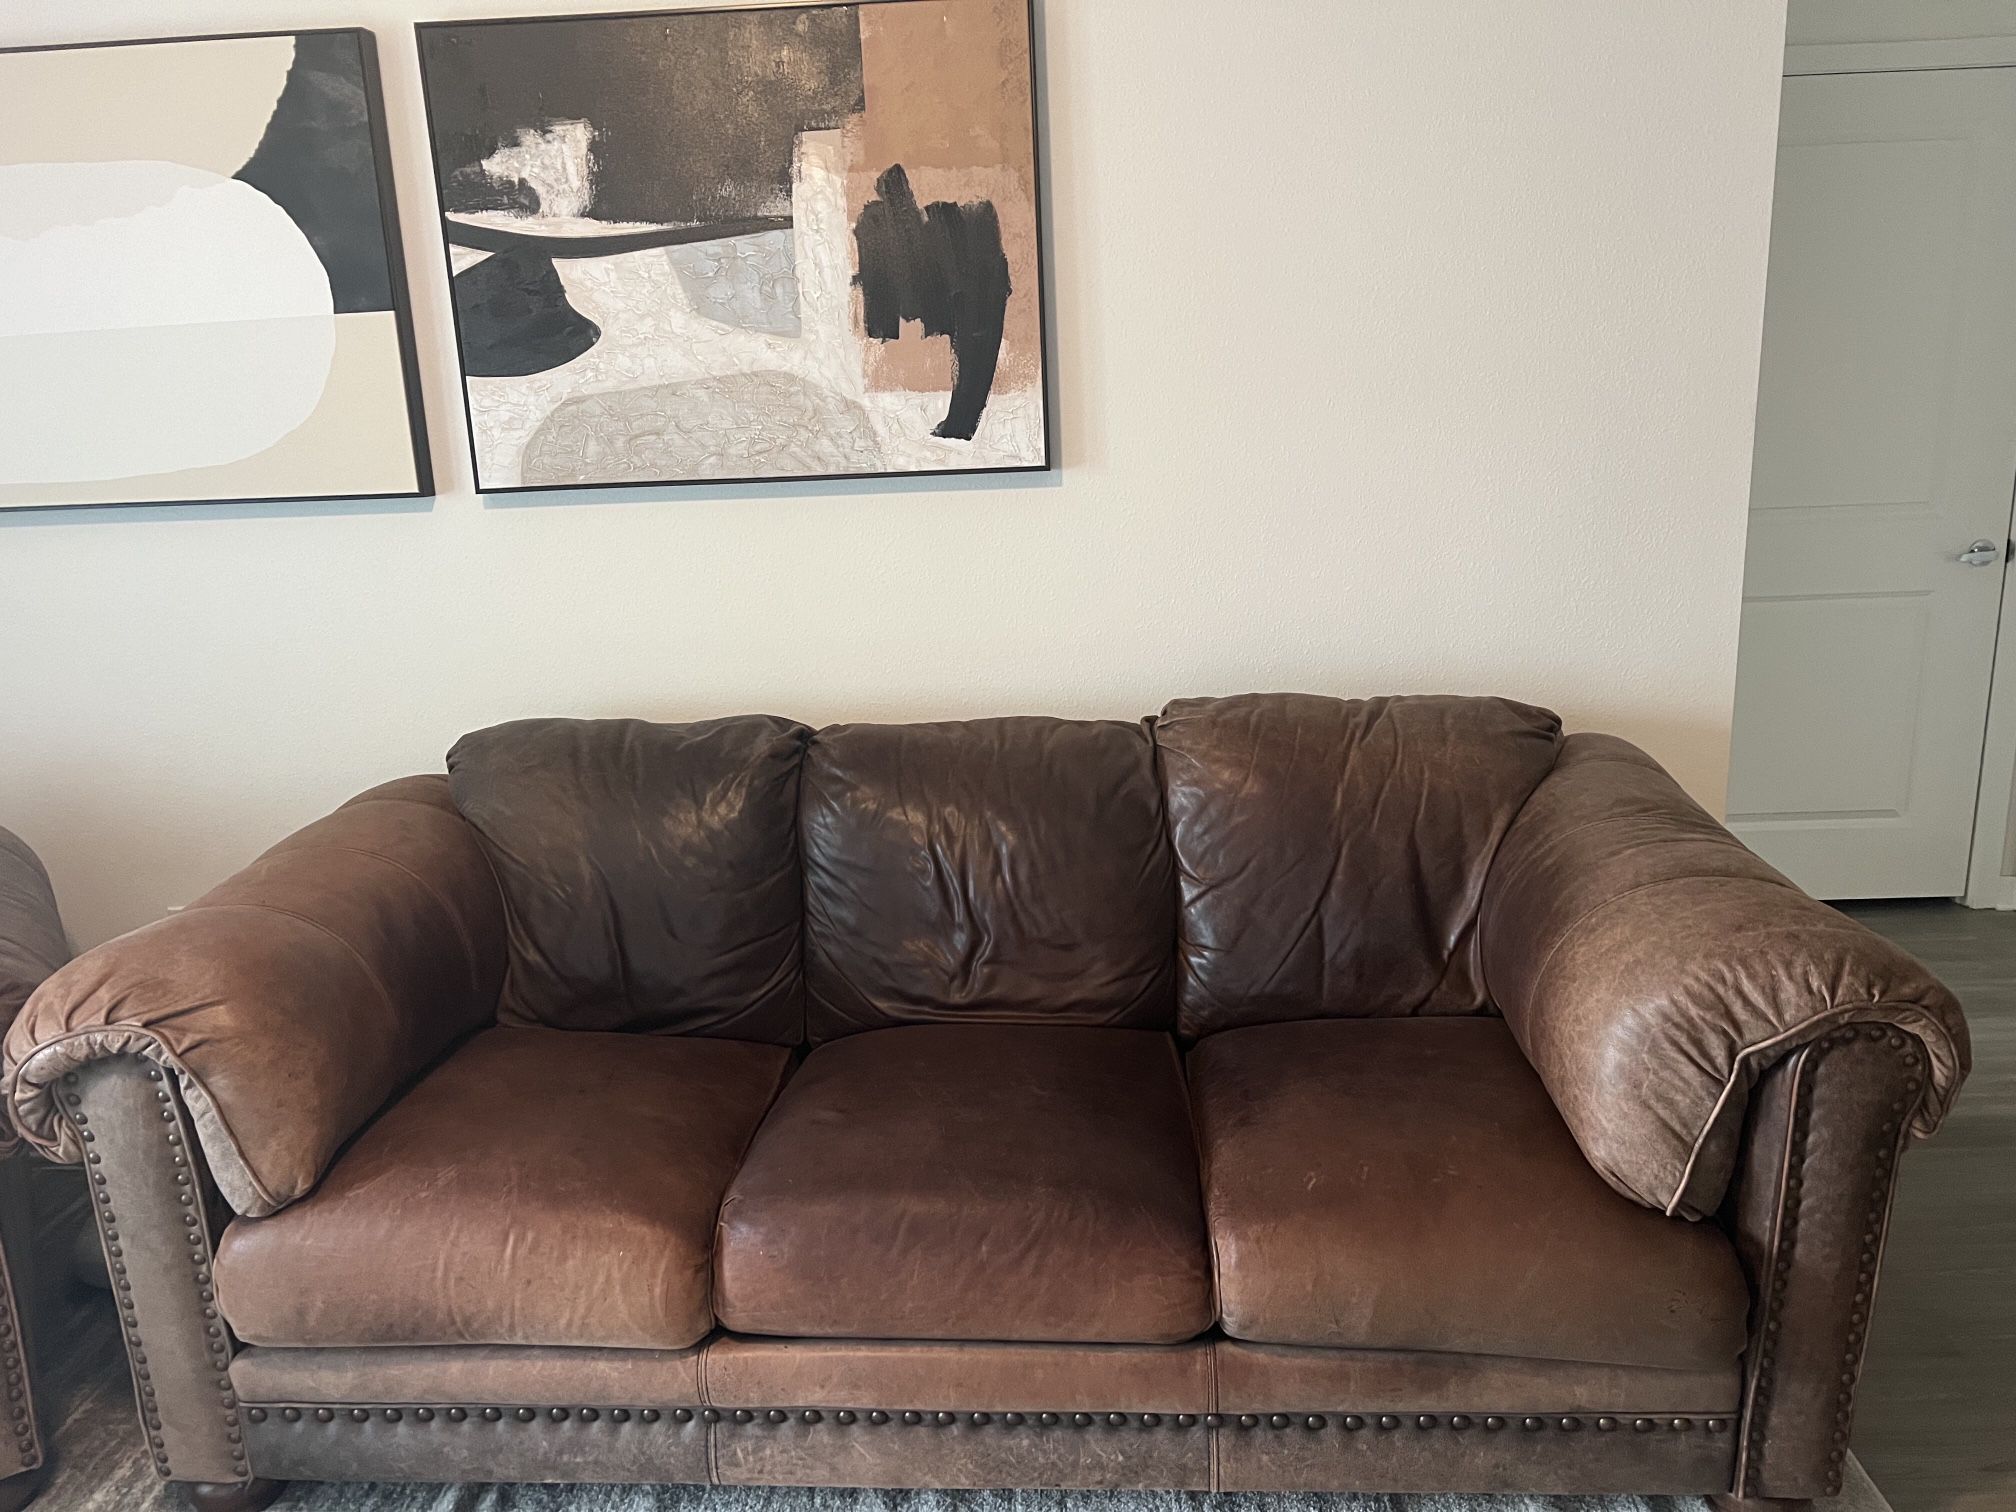 Haverty’s Leather Couch And Chair Set